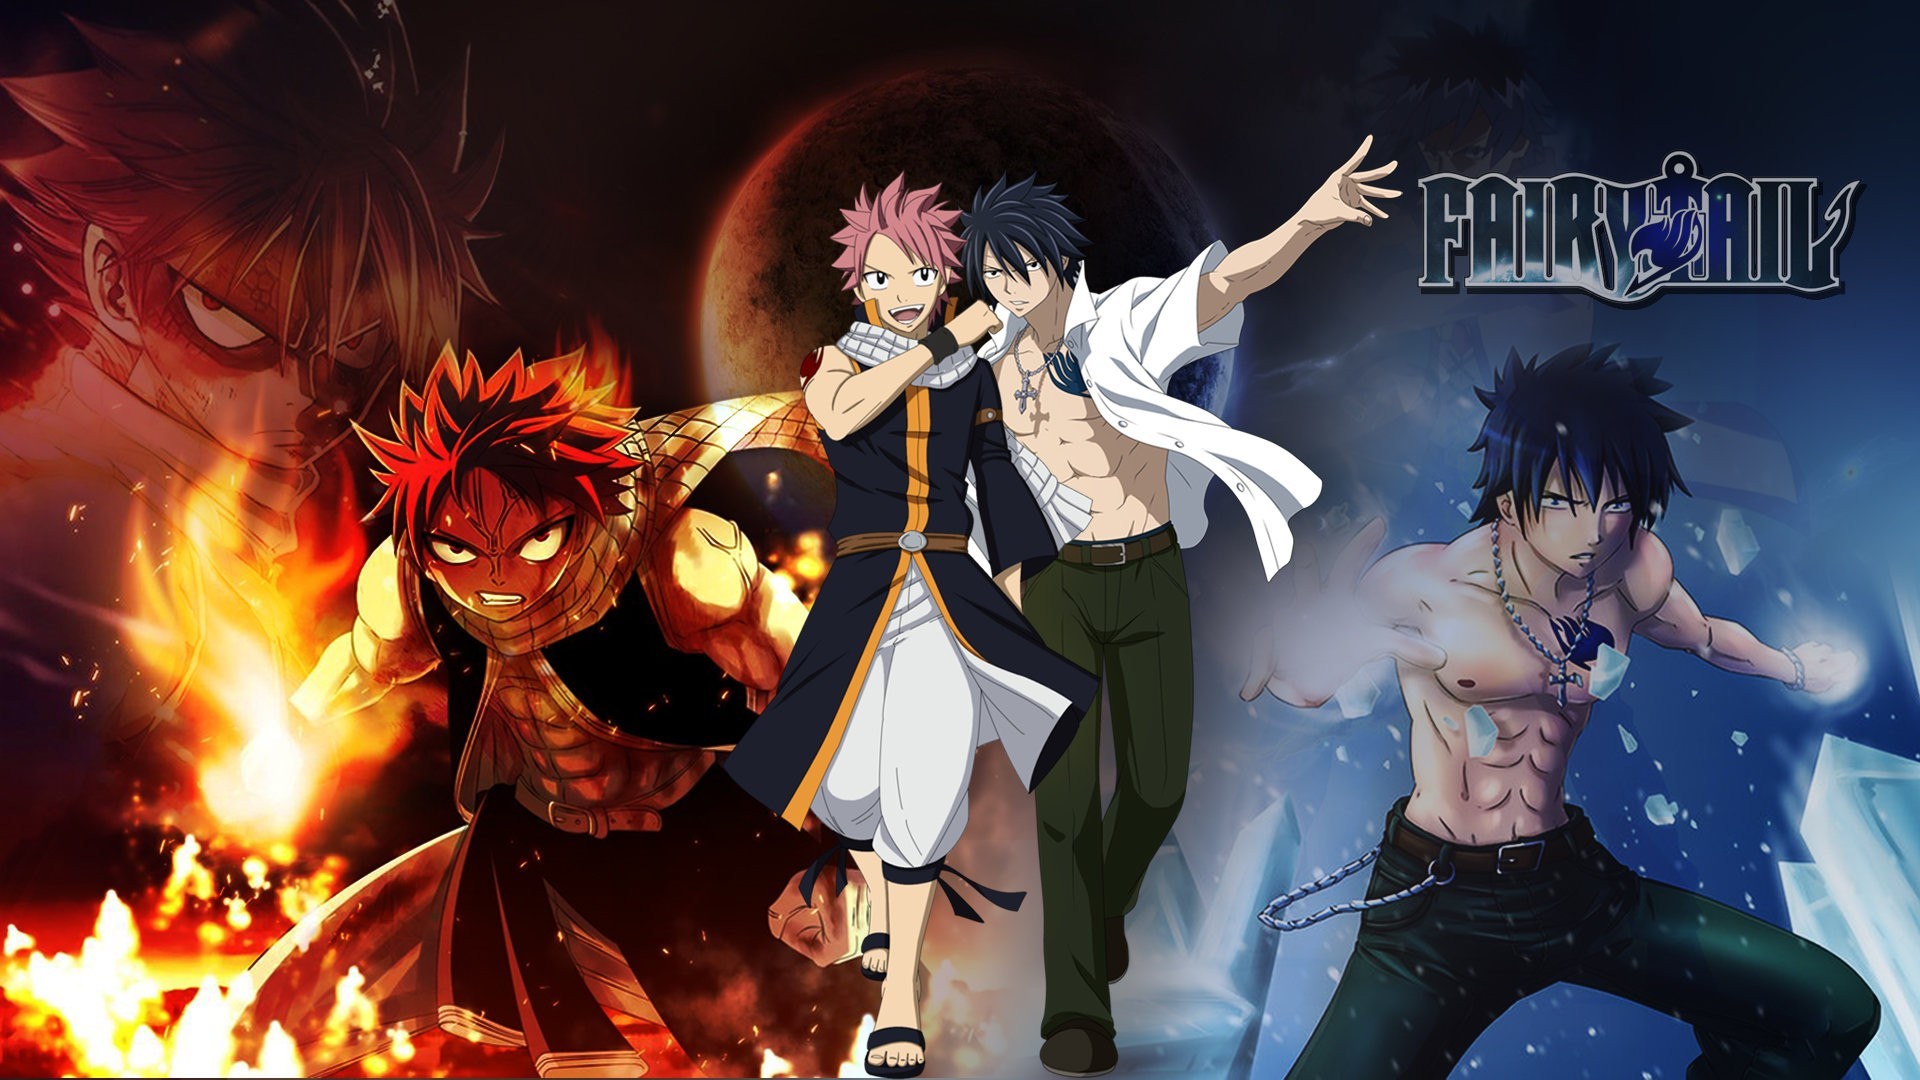 1920x1080 Fairy Tail Backgrounds Lovely Gray Fullbuster Wallpapers Full Hd 1080p  Desktop Backgrounds Of Fairy Tail Backgrounds